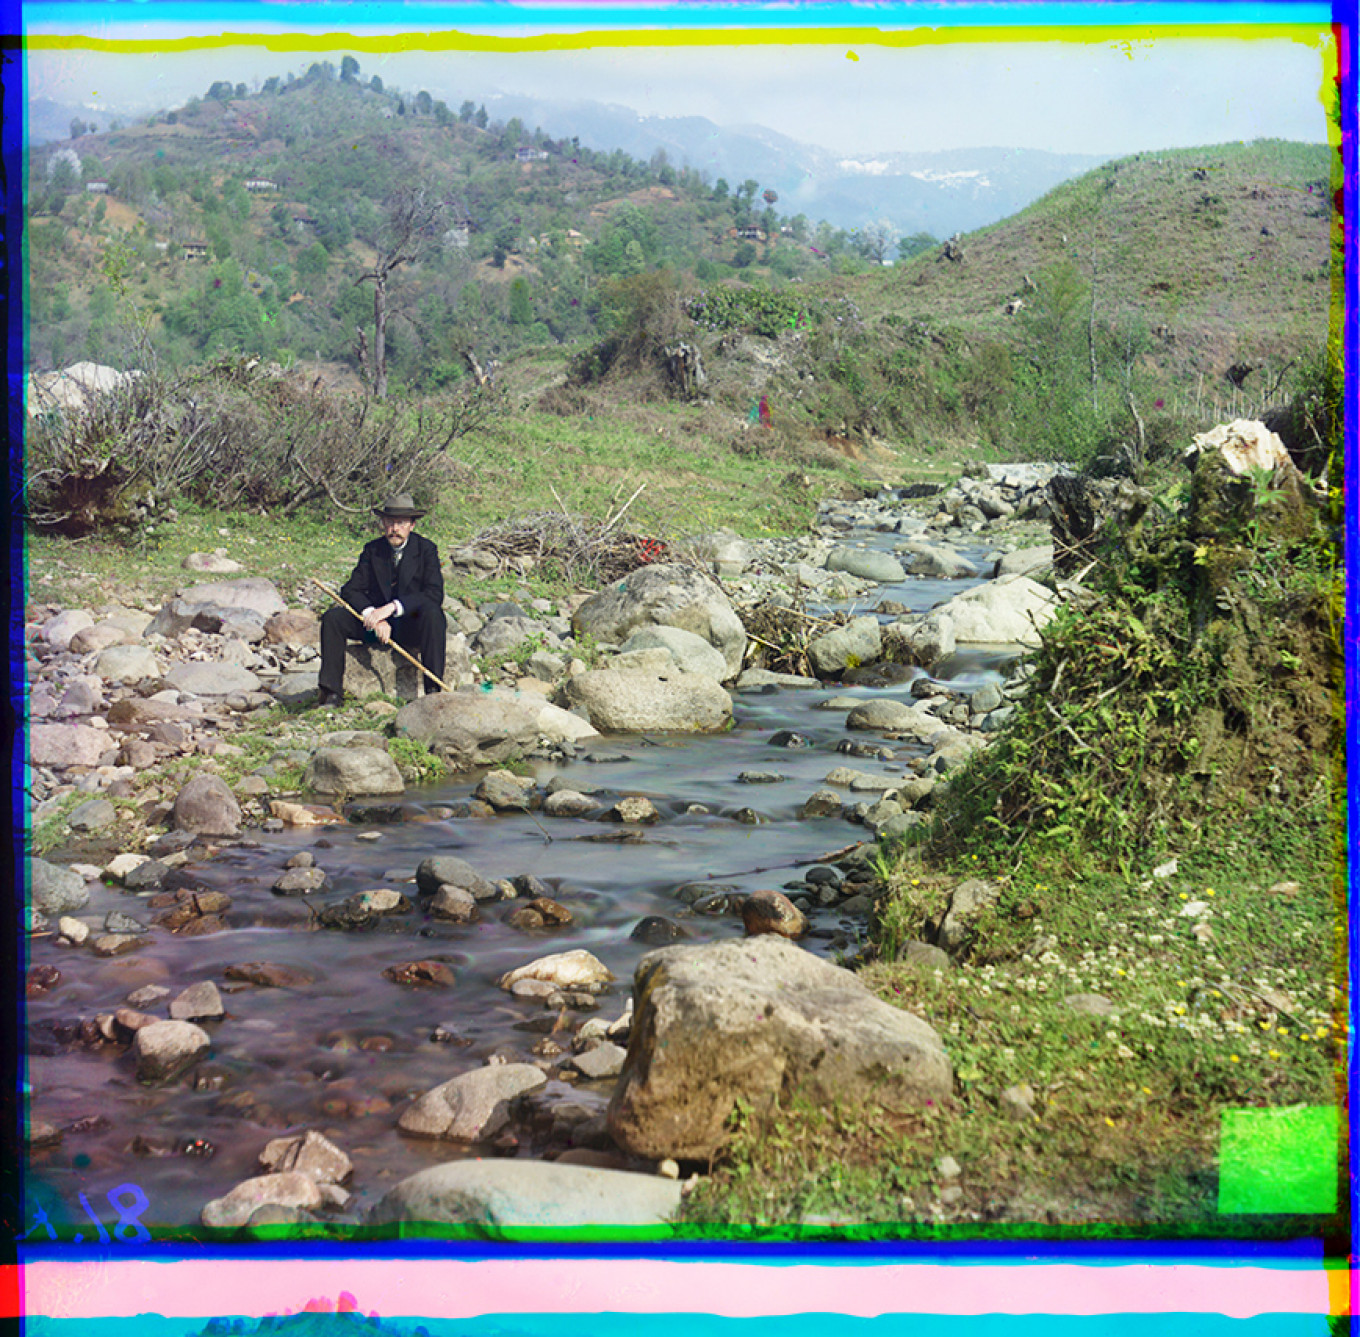  Sergey Prokudin-Gorsky by Skuritskhali River near Batumi, taken in March 1912 by one of his assistants. 21468 